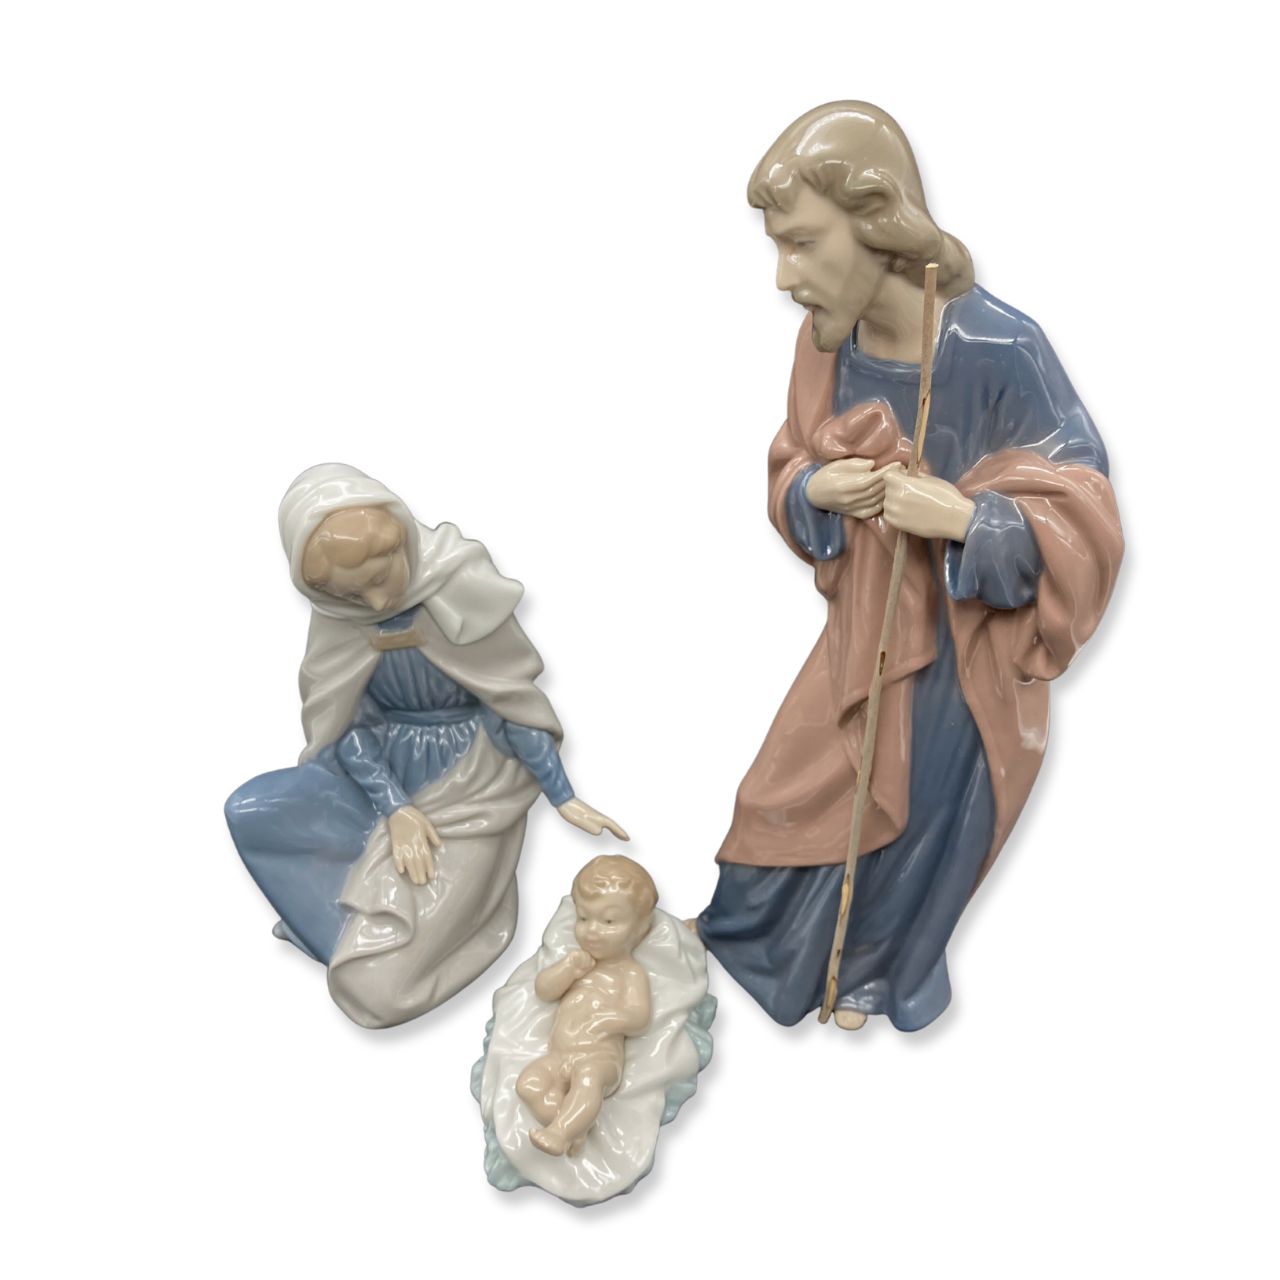 Nao by Lladro Virgin Mary  Nao porcelain figurine “Virgin Mary” from the Christmas Collection.  Sculpted by Salvador Furió, this figurine is part of the nativity set.  Nao Porcelain Figurines are produced in Valencia Spain and the Company is part of the Lladro family. Each piece is lovingly handmade and hand painted by the Valencia Artisans.